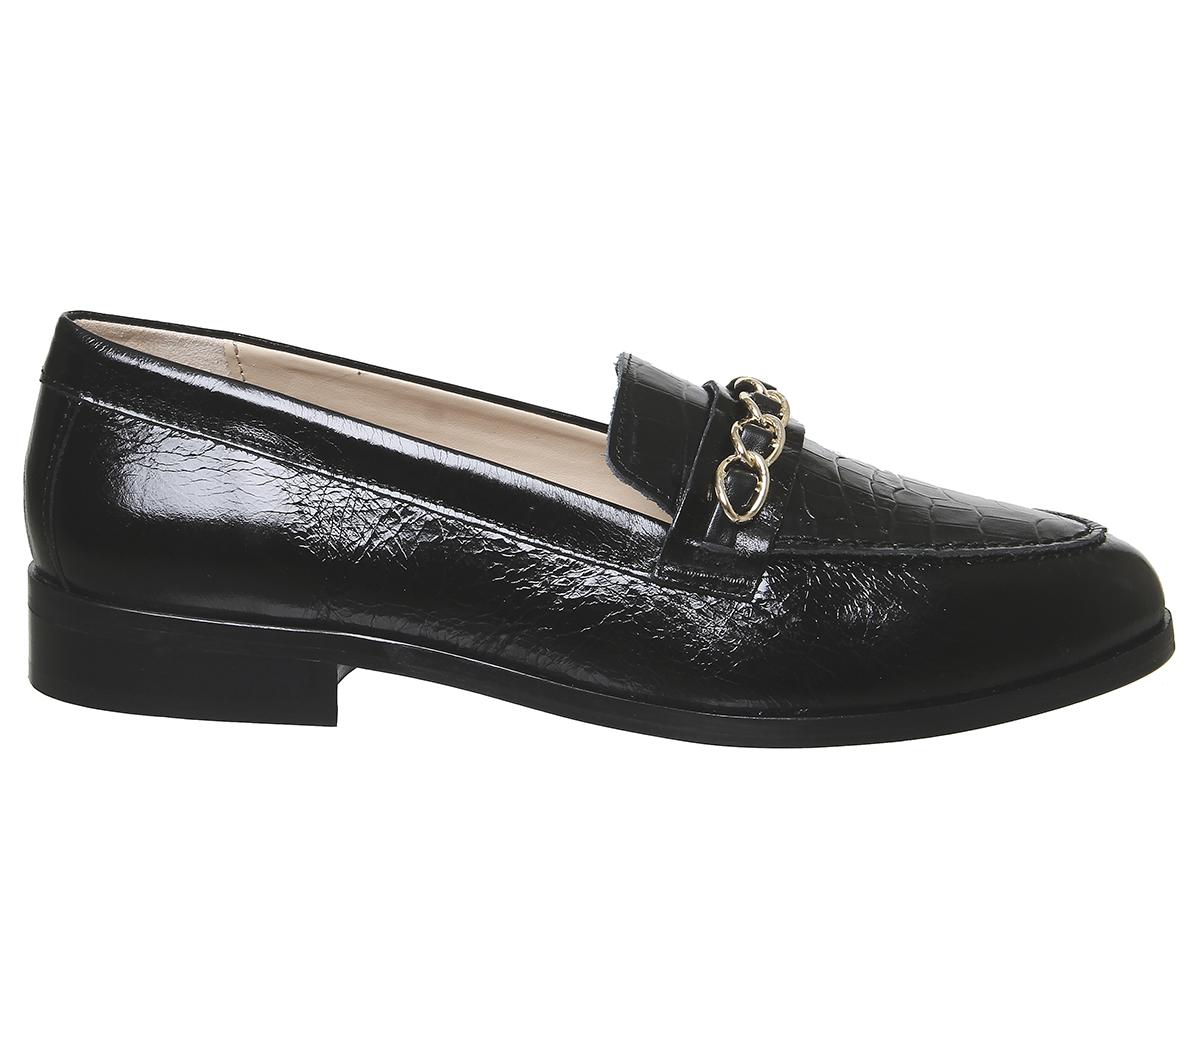 Office Fulfill Chain Loafers Black Leather - Women’s Loafers